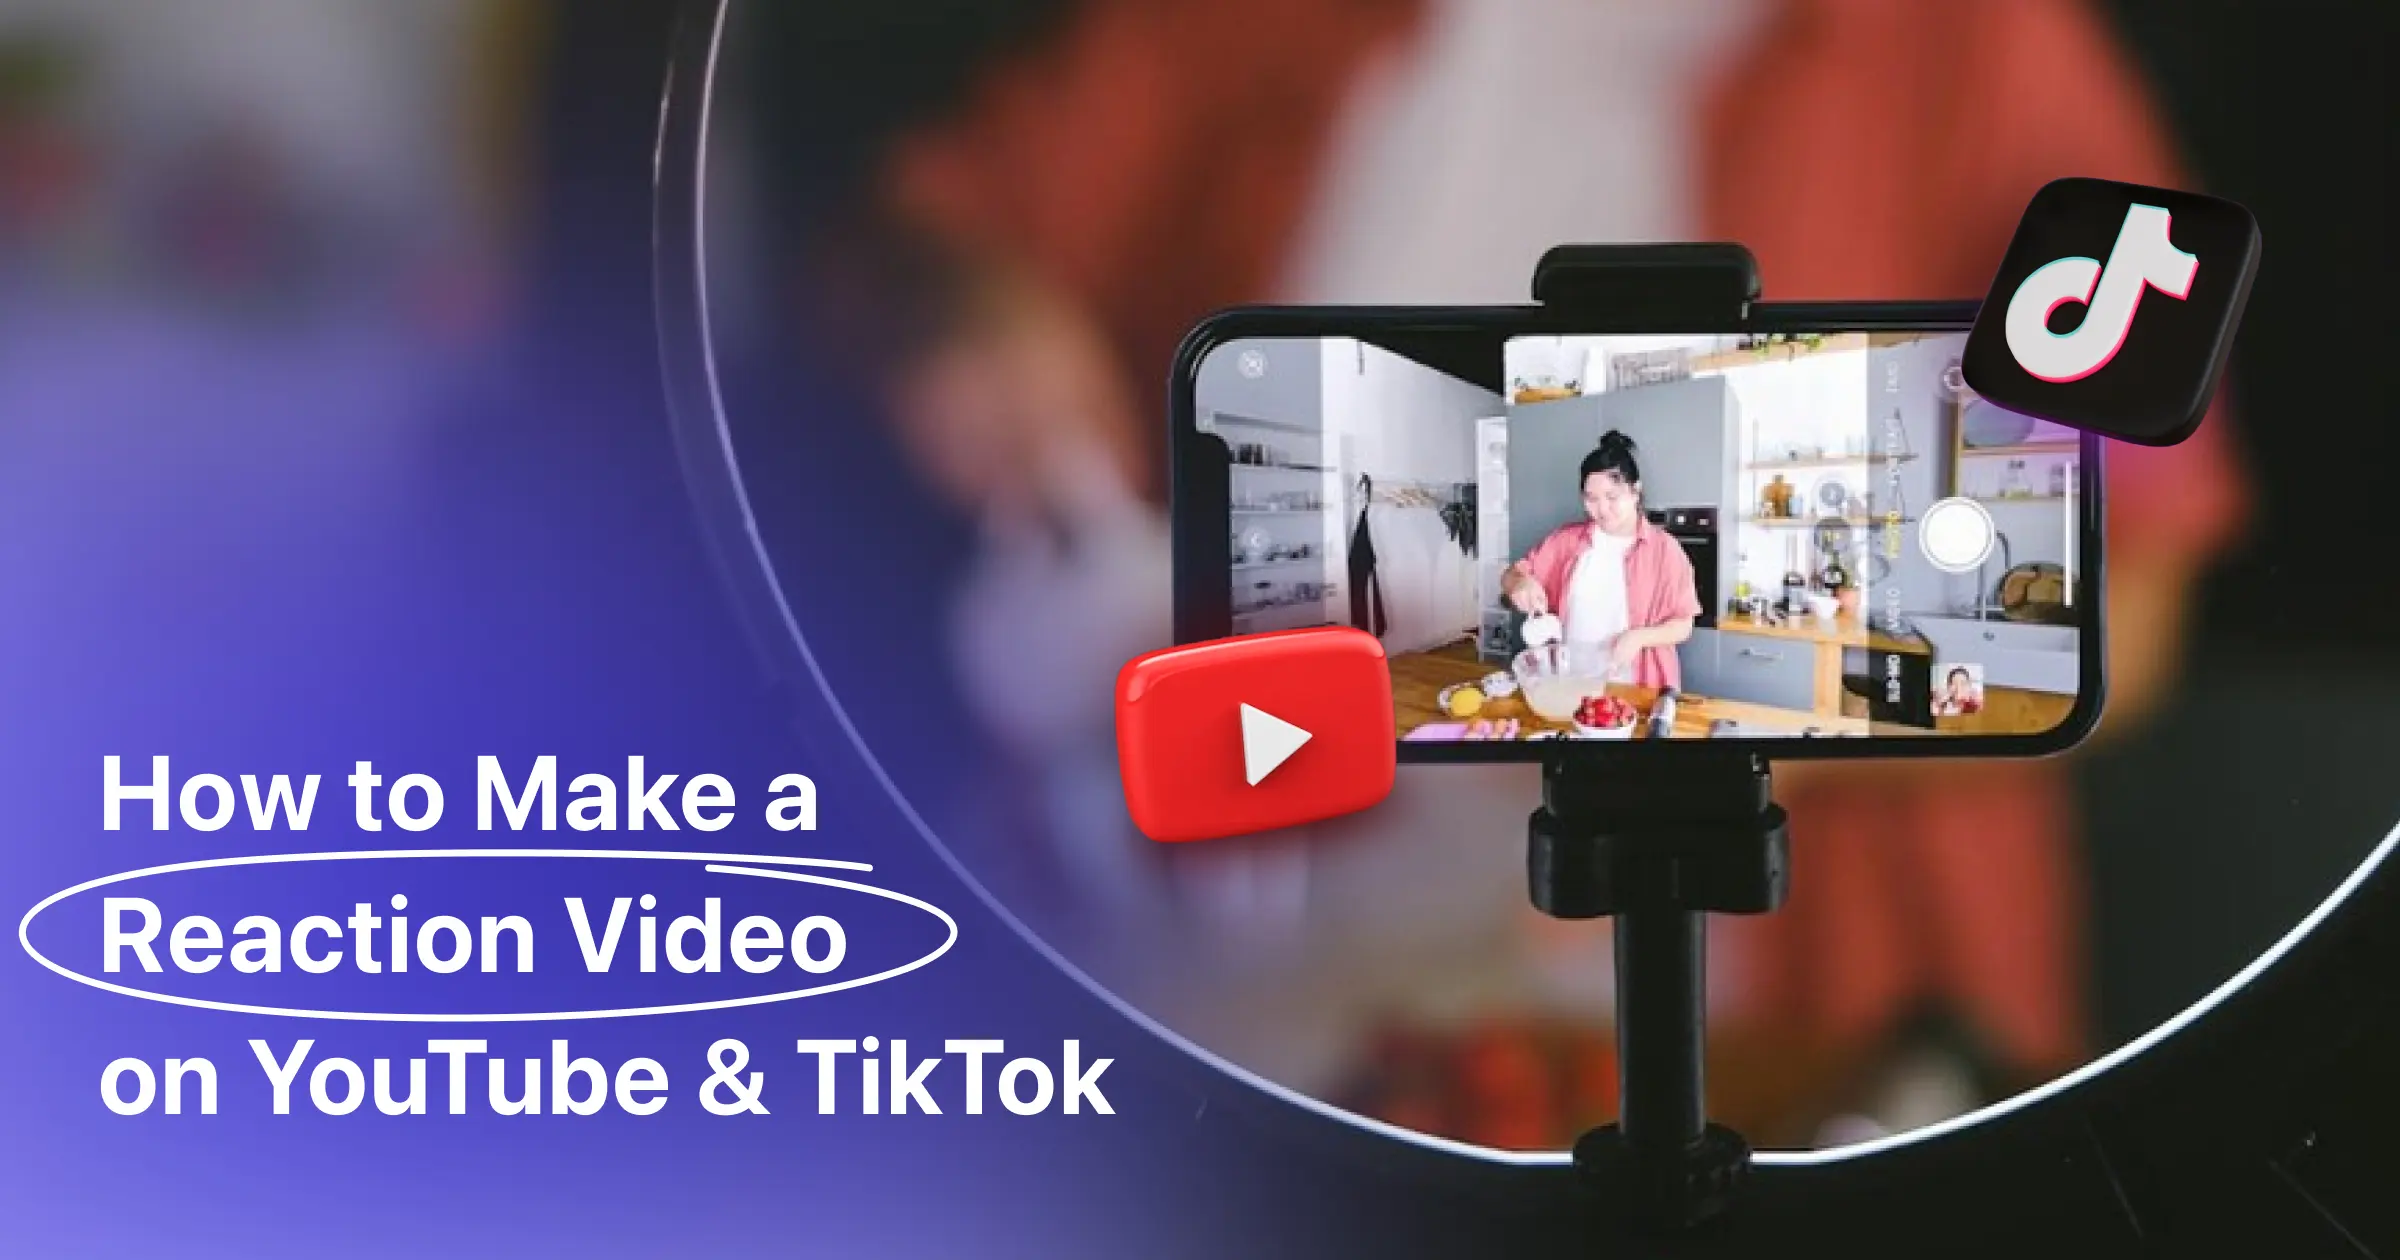 How to Make a Reaction Video on YouTube and TikTok (with your phone)?